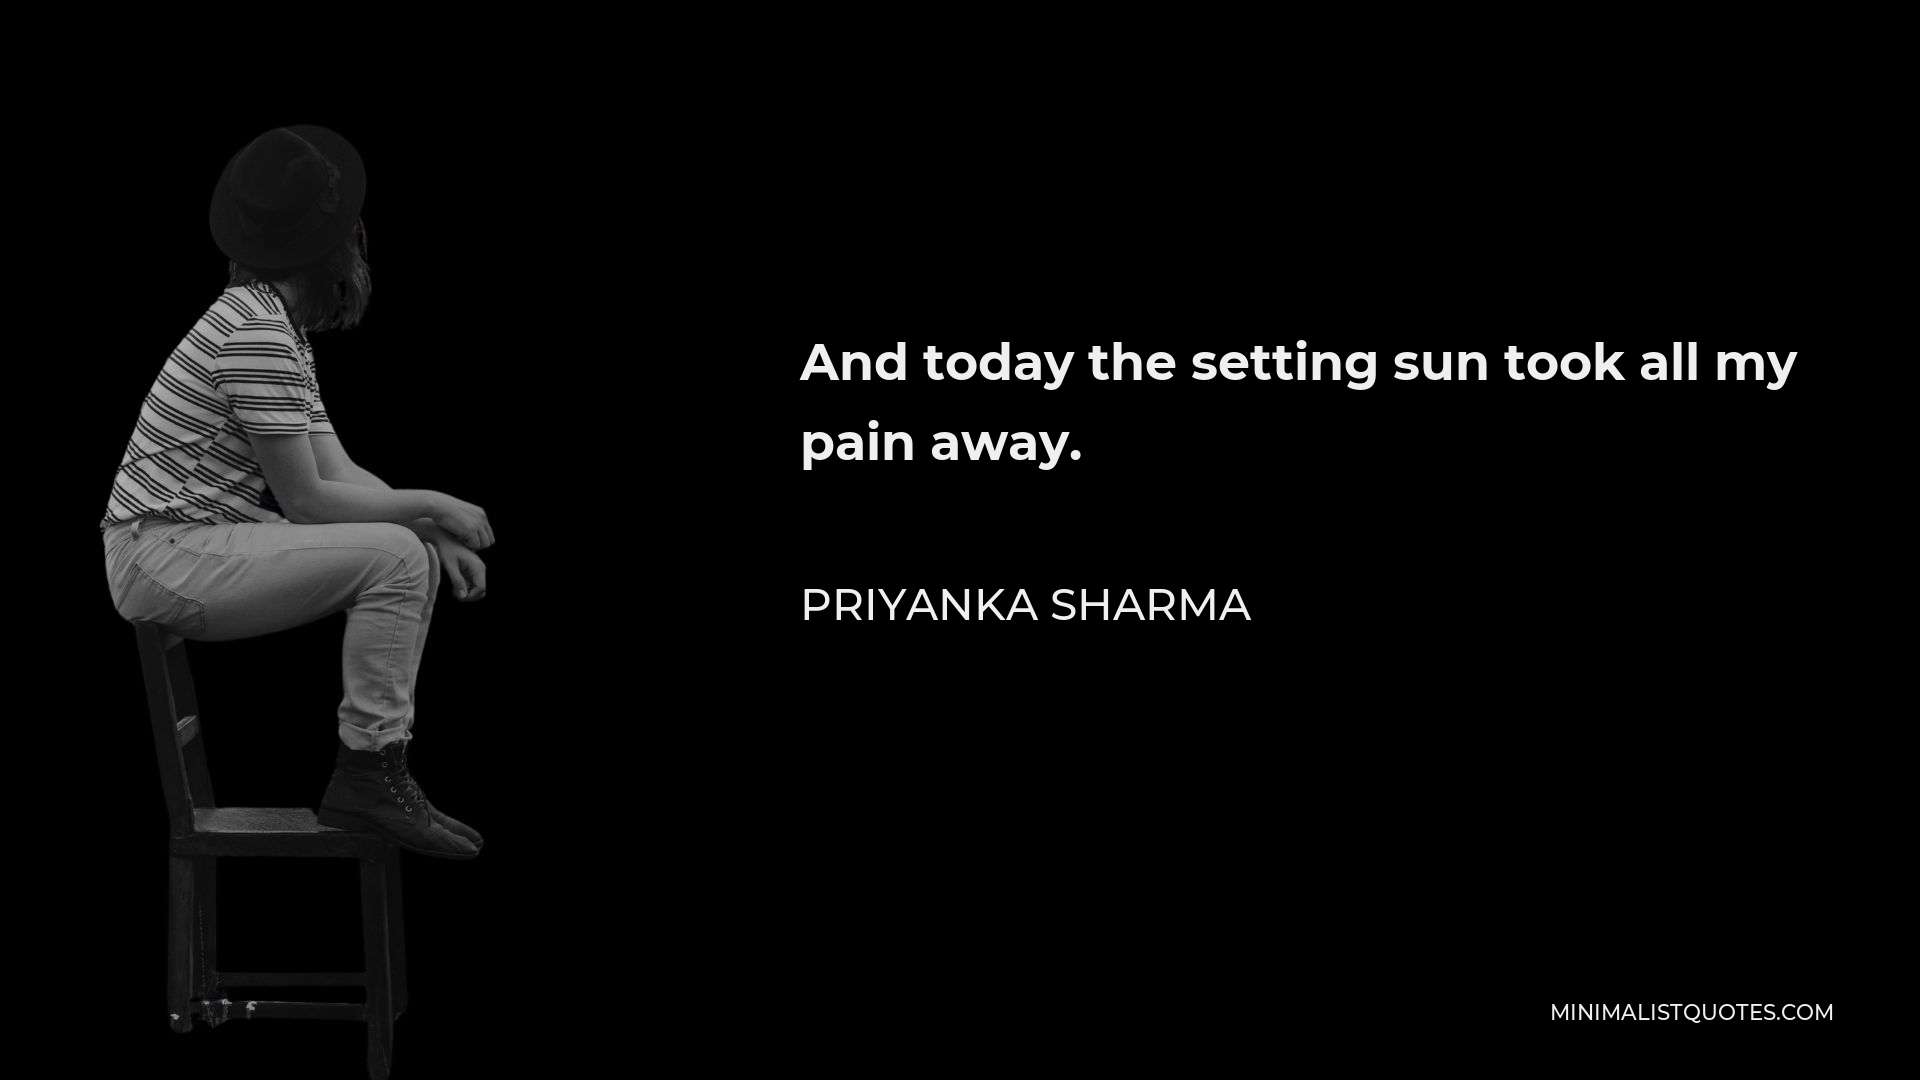 Priyanka Sharma Quote - And today the setting sun took all my pain away.